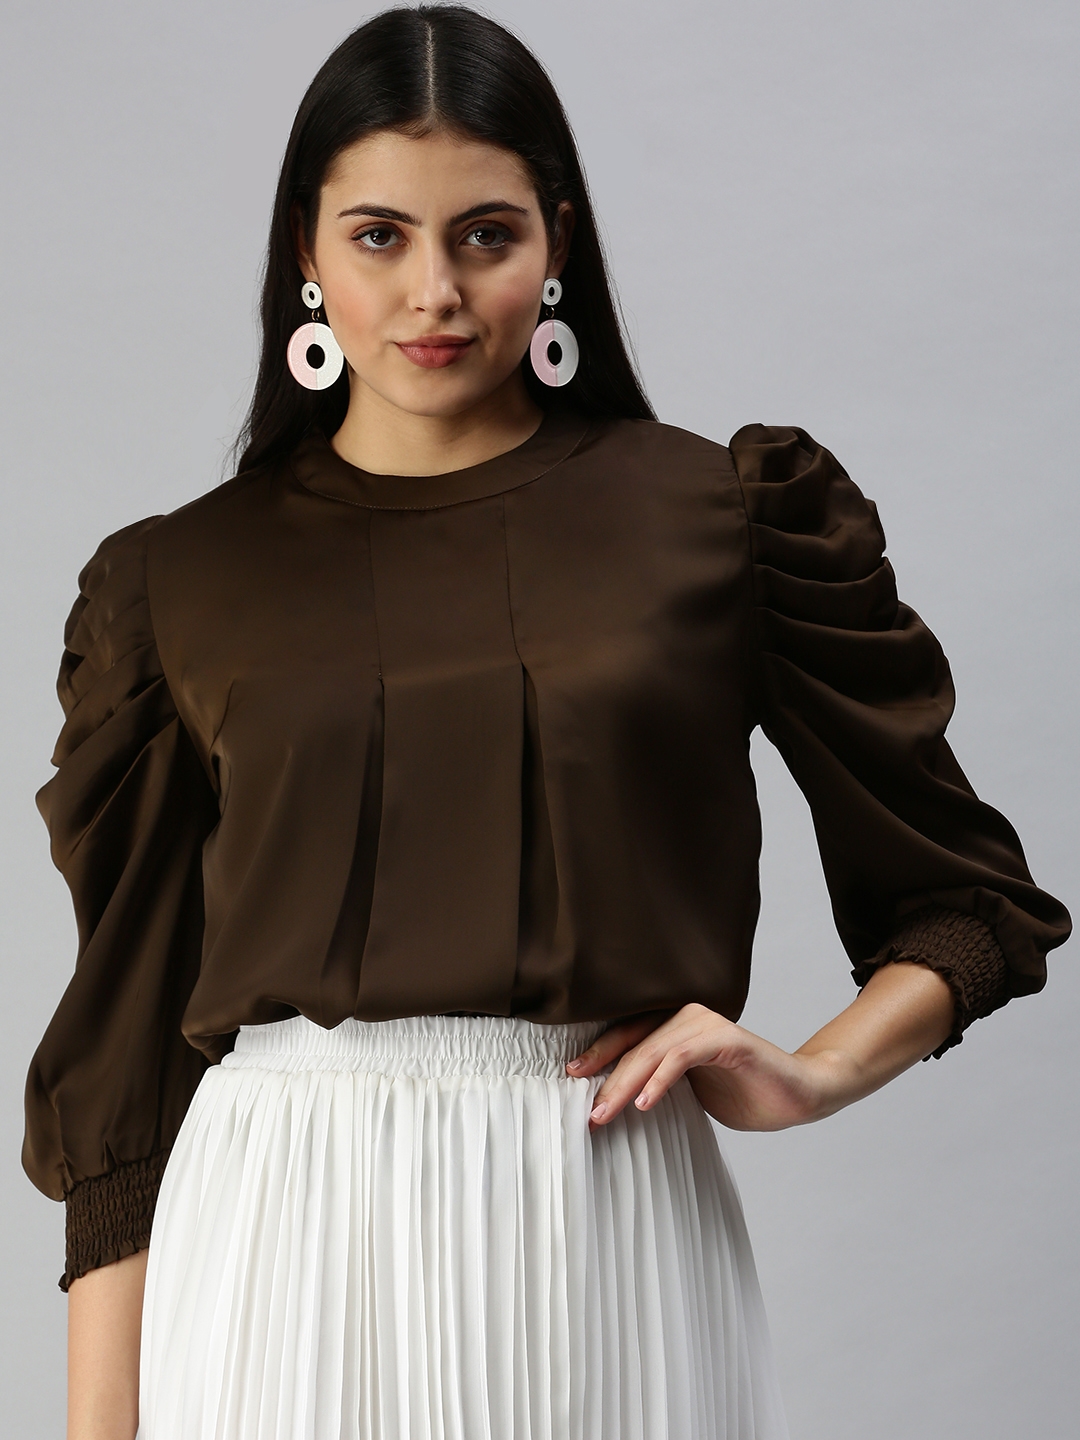 Women's Brown Polyester Solid Tops